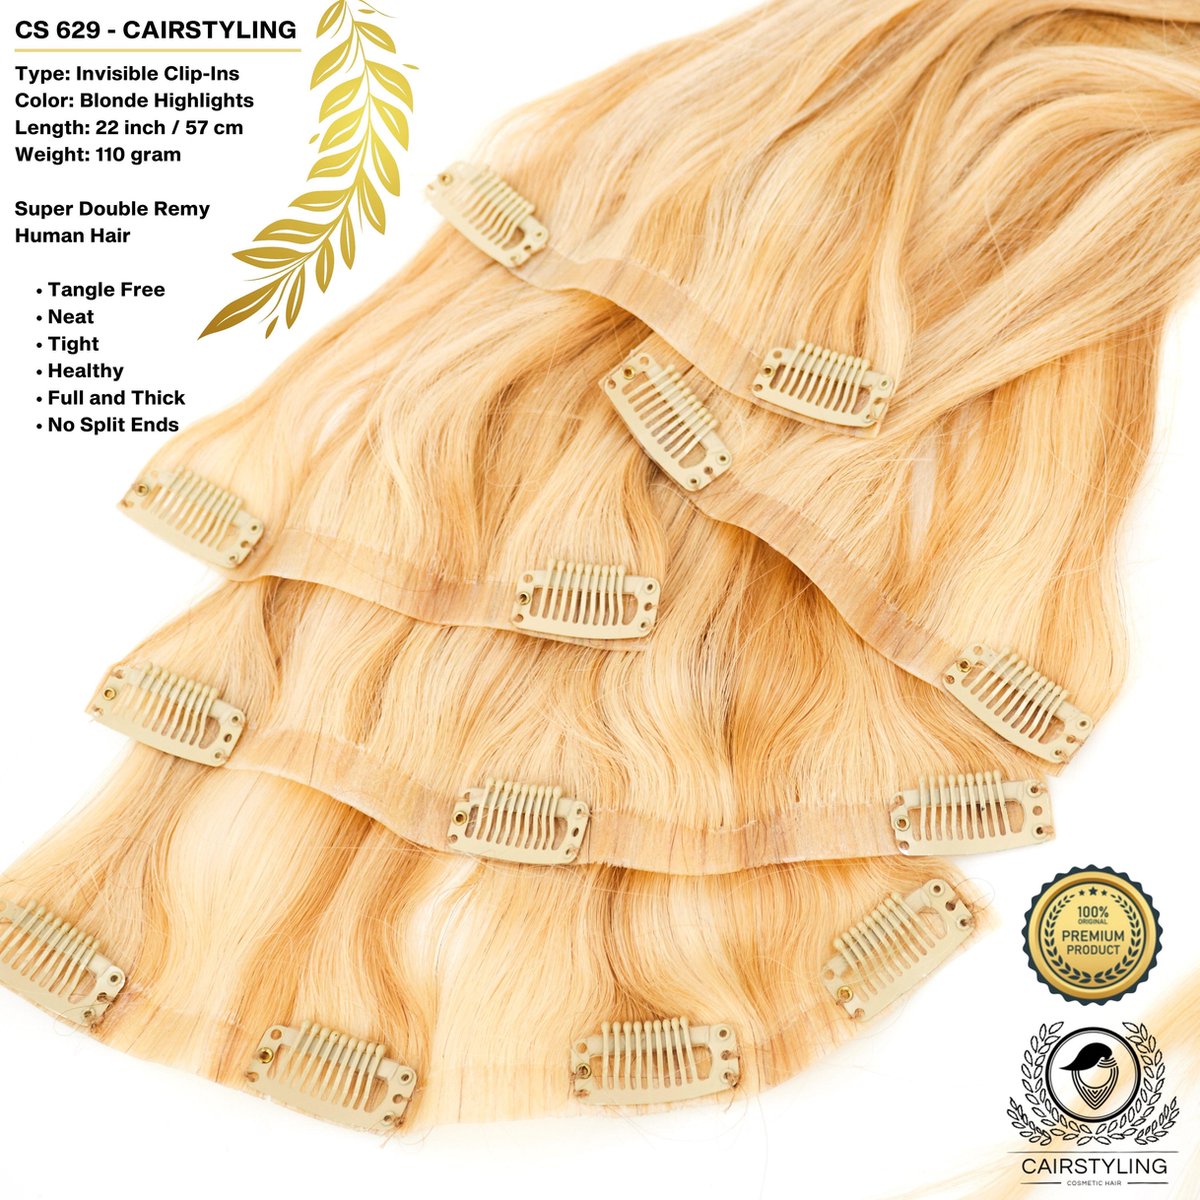 CAIRSTYLING Premium 100% Human Hair - CS629 INVISIBLE CLIP-IN - Super Double Remy Human Hair Extensions | 110 Gram | 57 CM (22 inch) | Haarverlenging | Best Quality Hair Long-term Use | 2022 Trending Invisible Laces | Warm Blonde Highlights